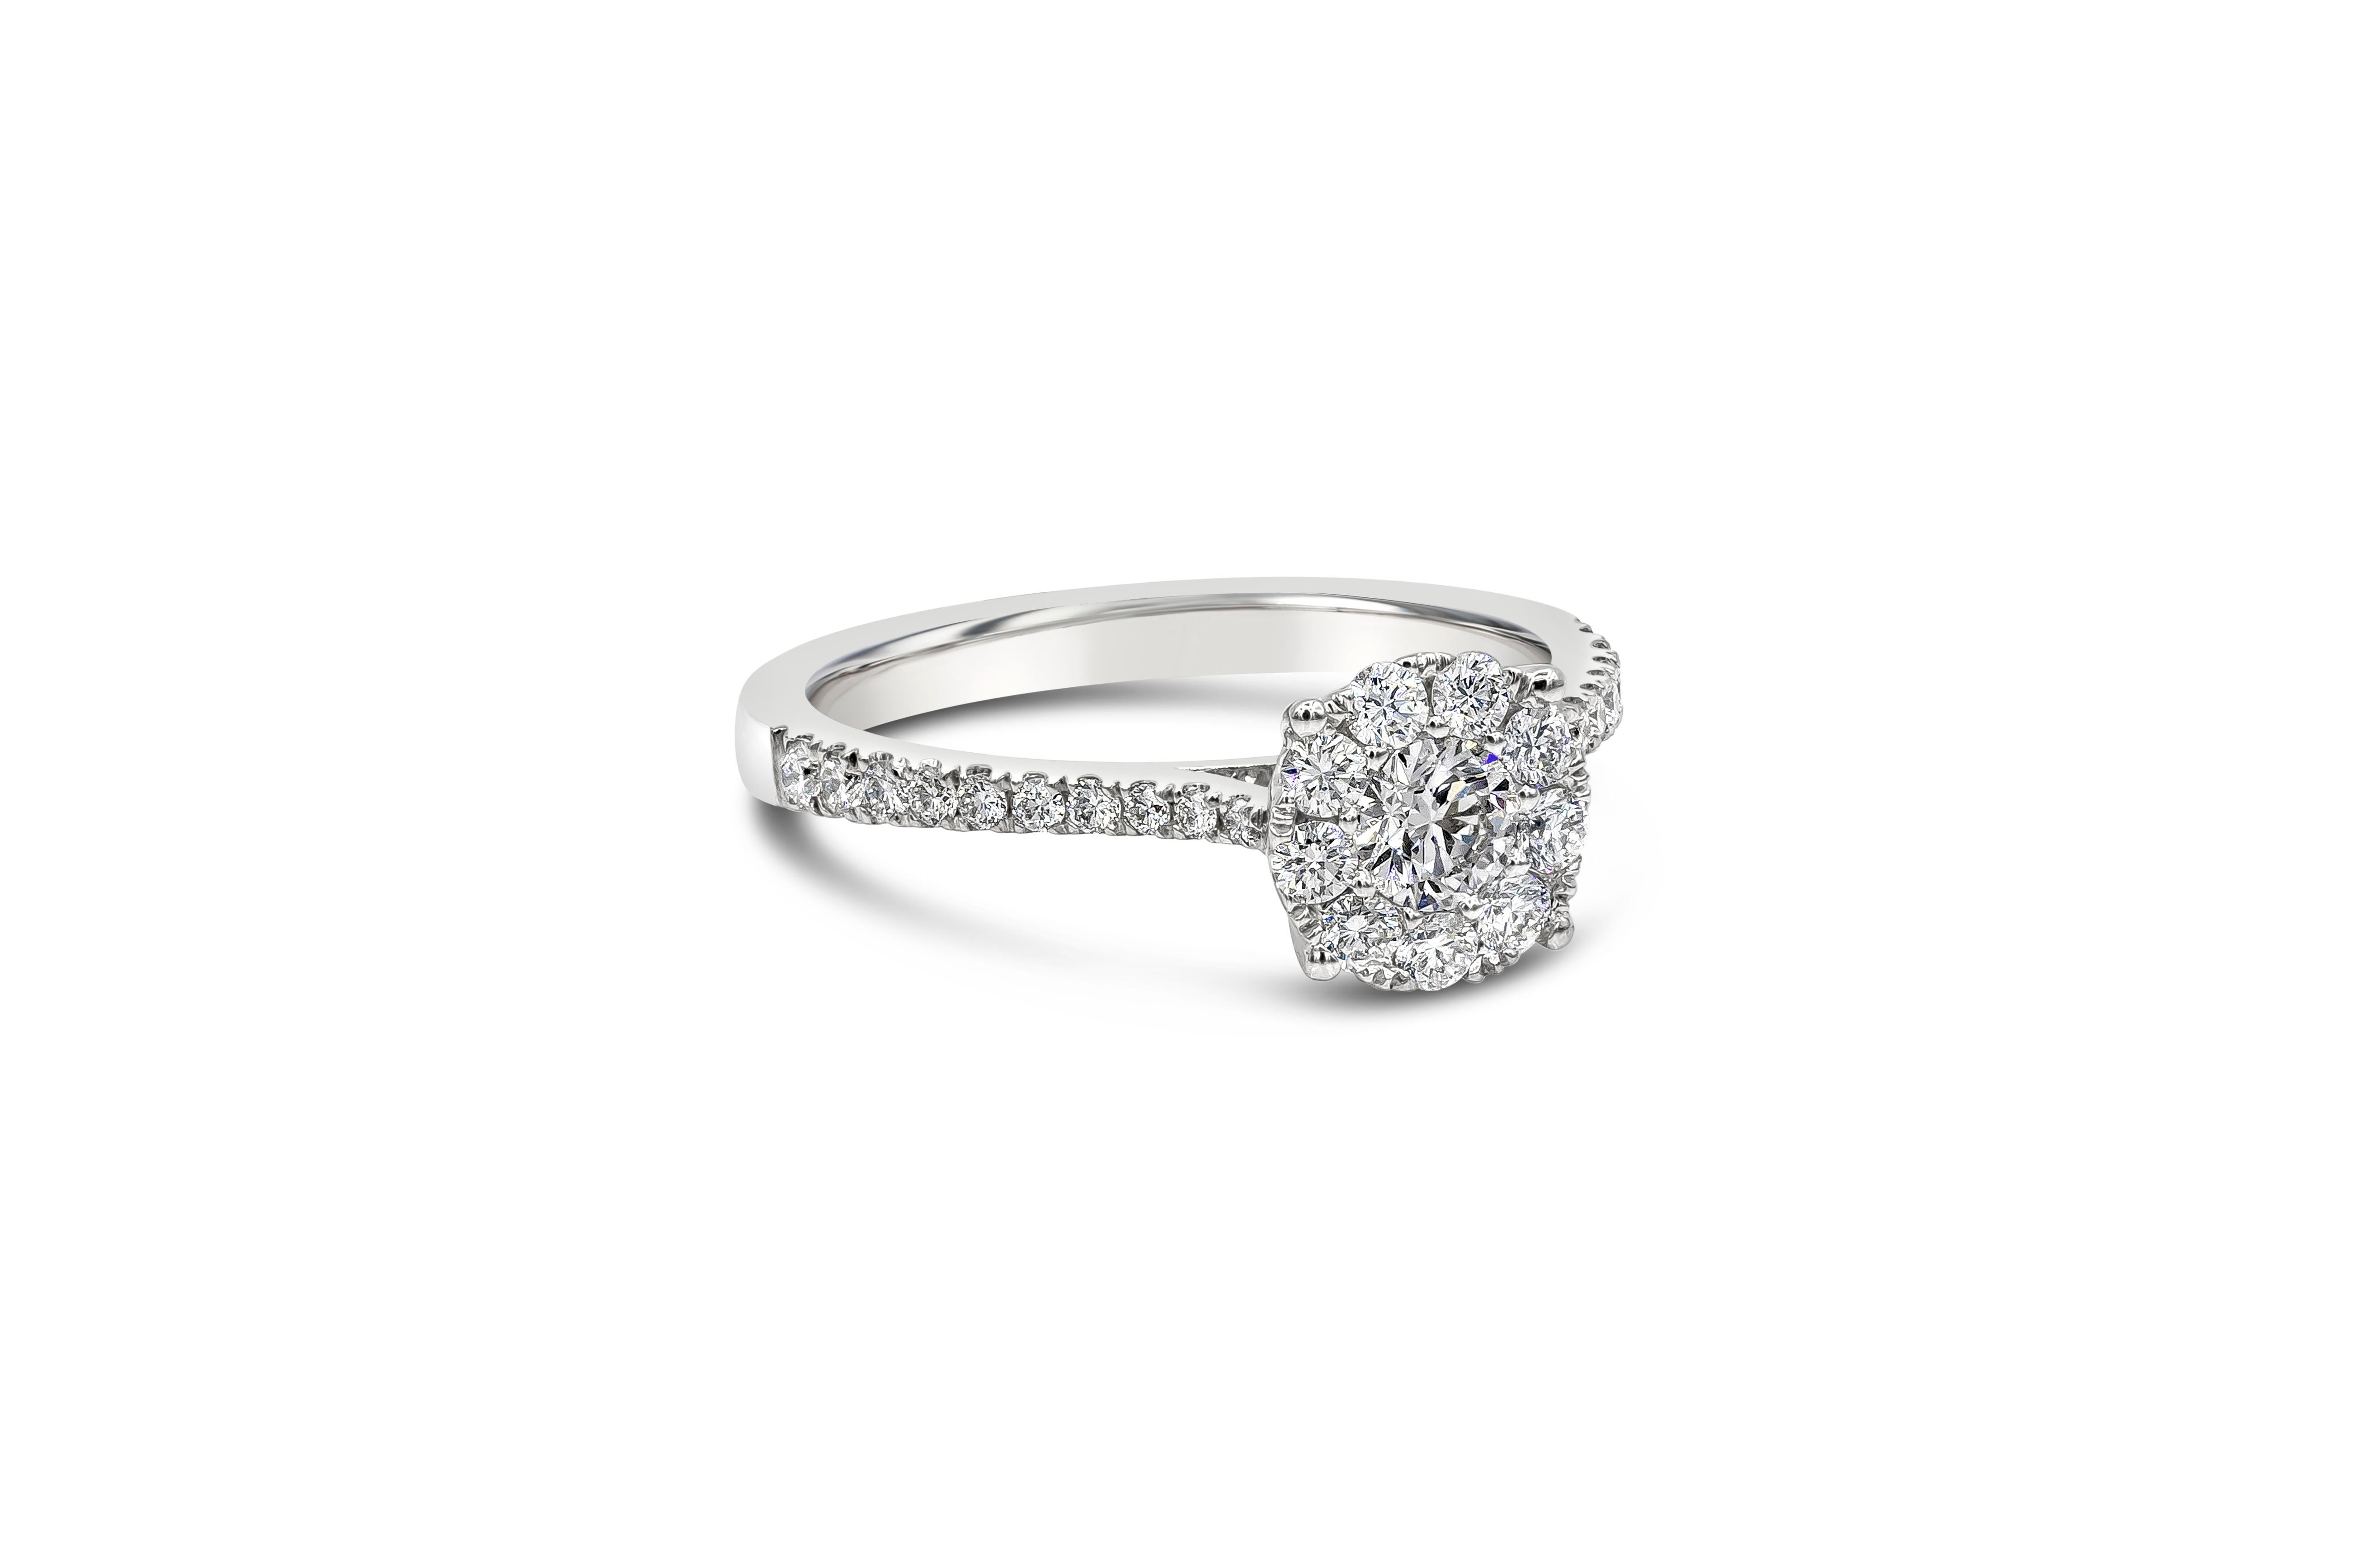 A classic  and budget-friendly engagement ring style showcasing a cluster of round brilliant diamonds that looks like one center diamond. Set in a tapered pave setting made in 18k white gold. Diamonds weigh 0.72 carats total. 

Style available in